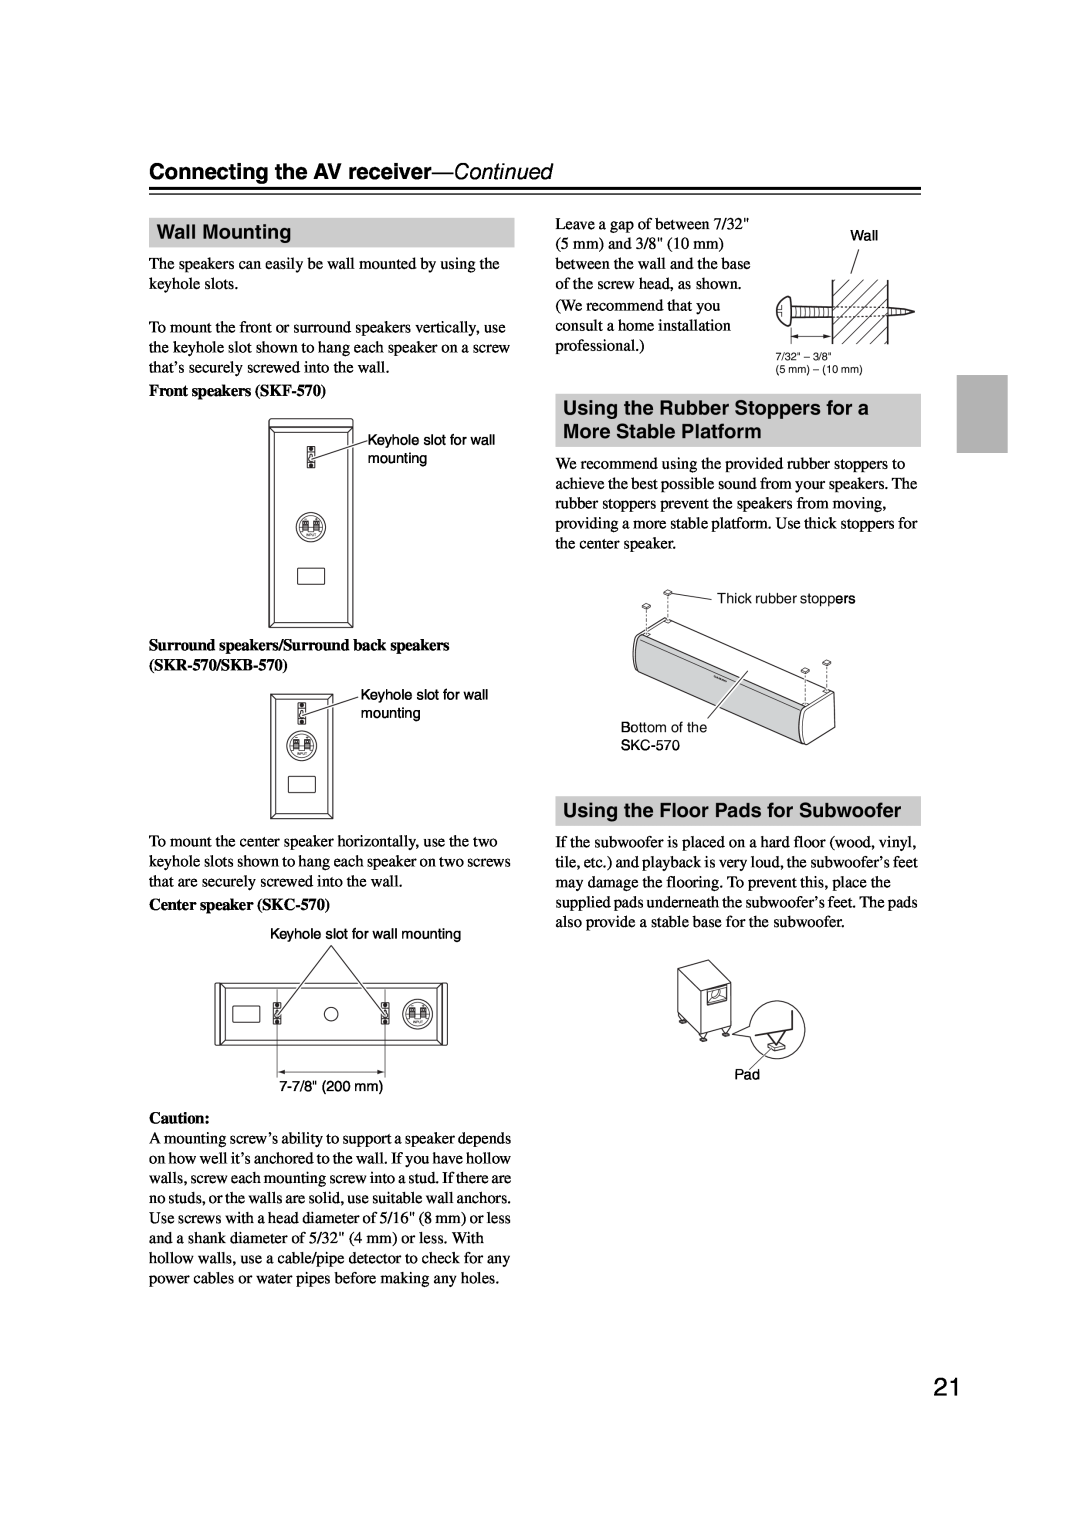 Onkyo 29344934 instruction manual Wall Mounting, Using the Floor Pads for Subwoofer, Connecting the AV receiver—Continued 